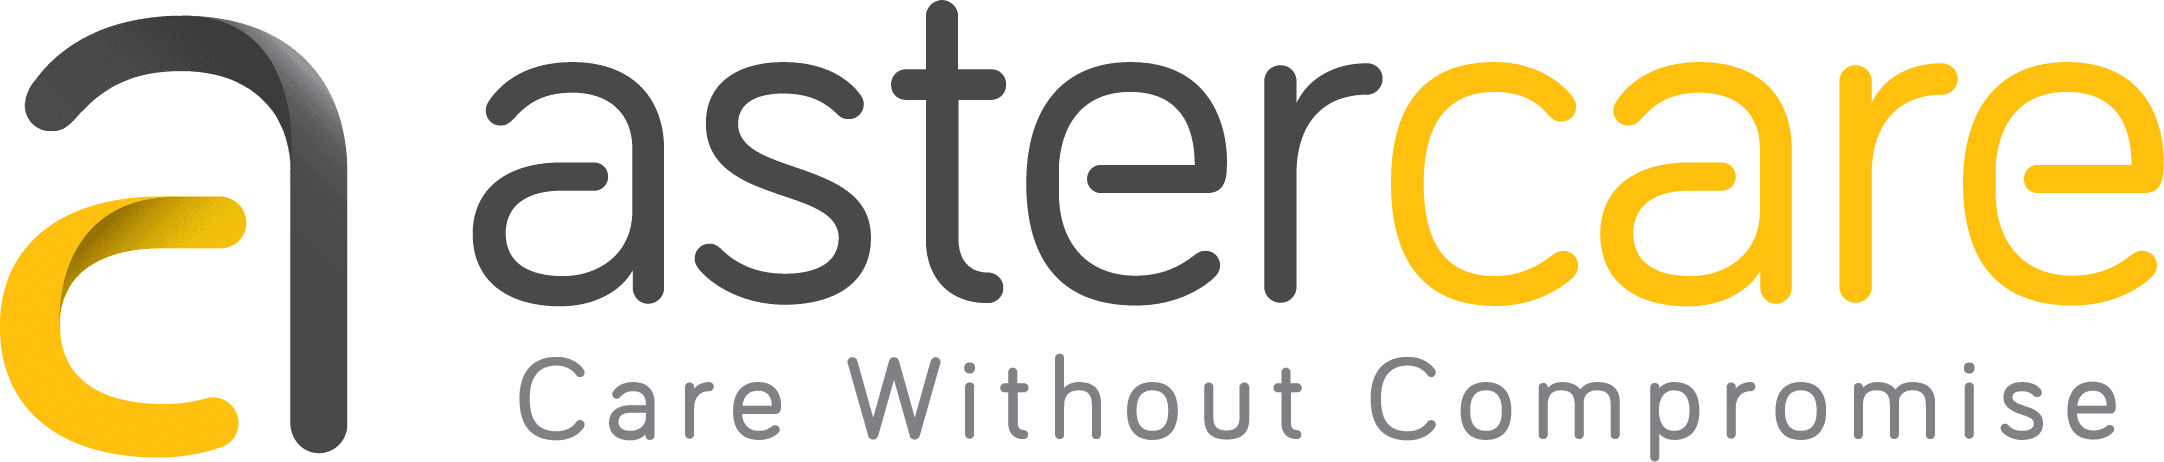 Aster Care logo with strap line "care without compromise". Aster Care provide at home care services in Portsmouth and the surrounding region.